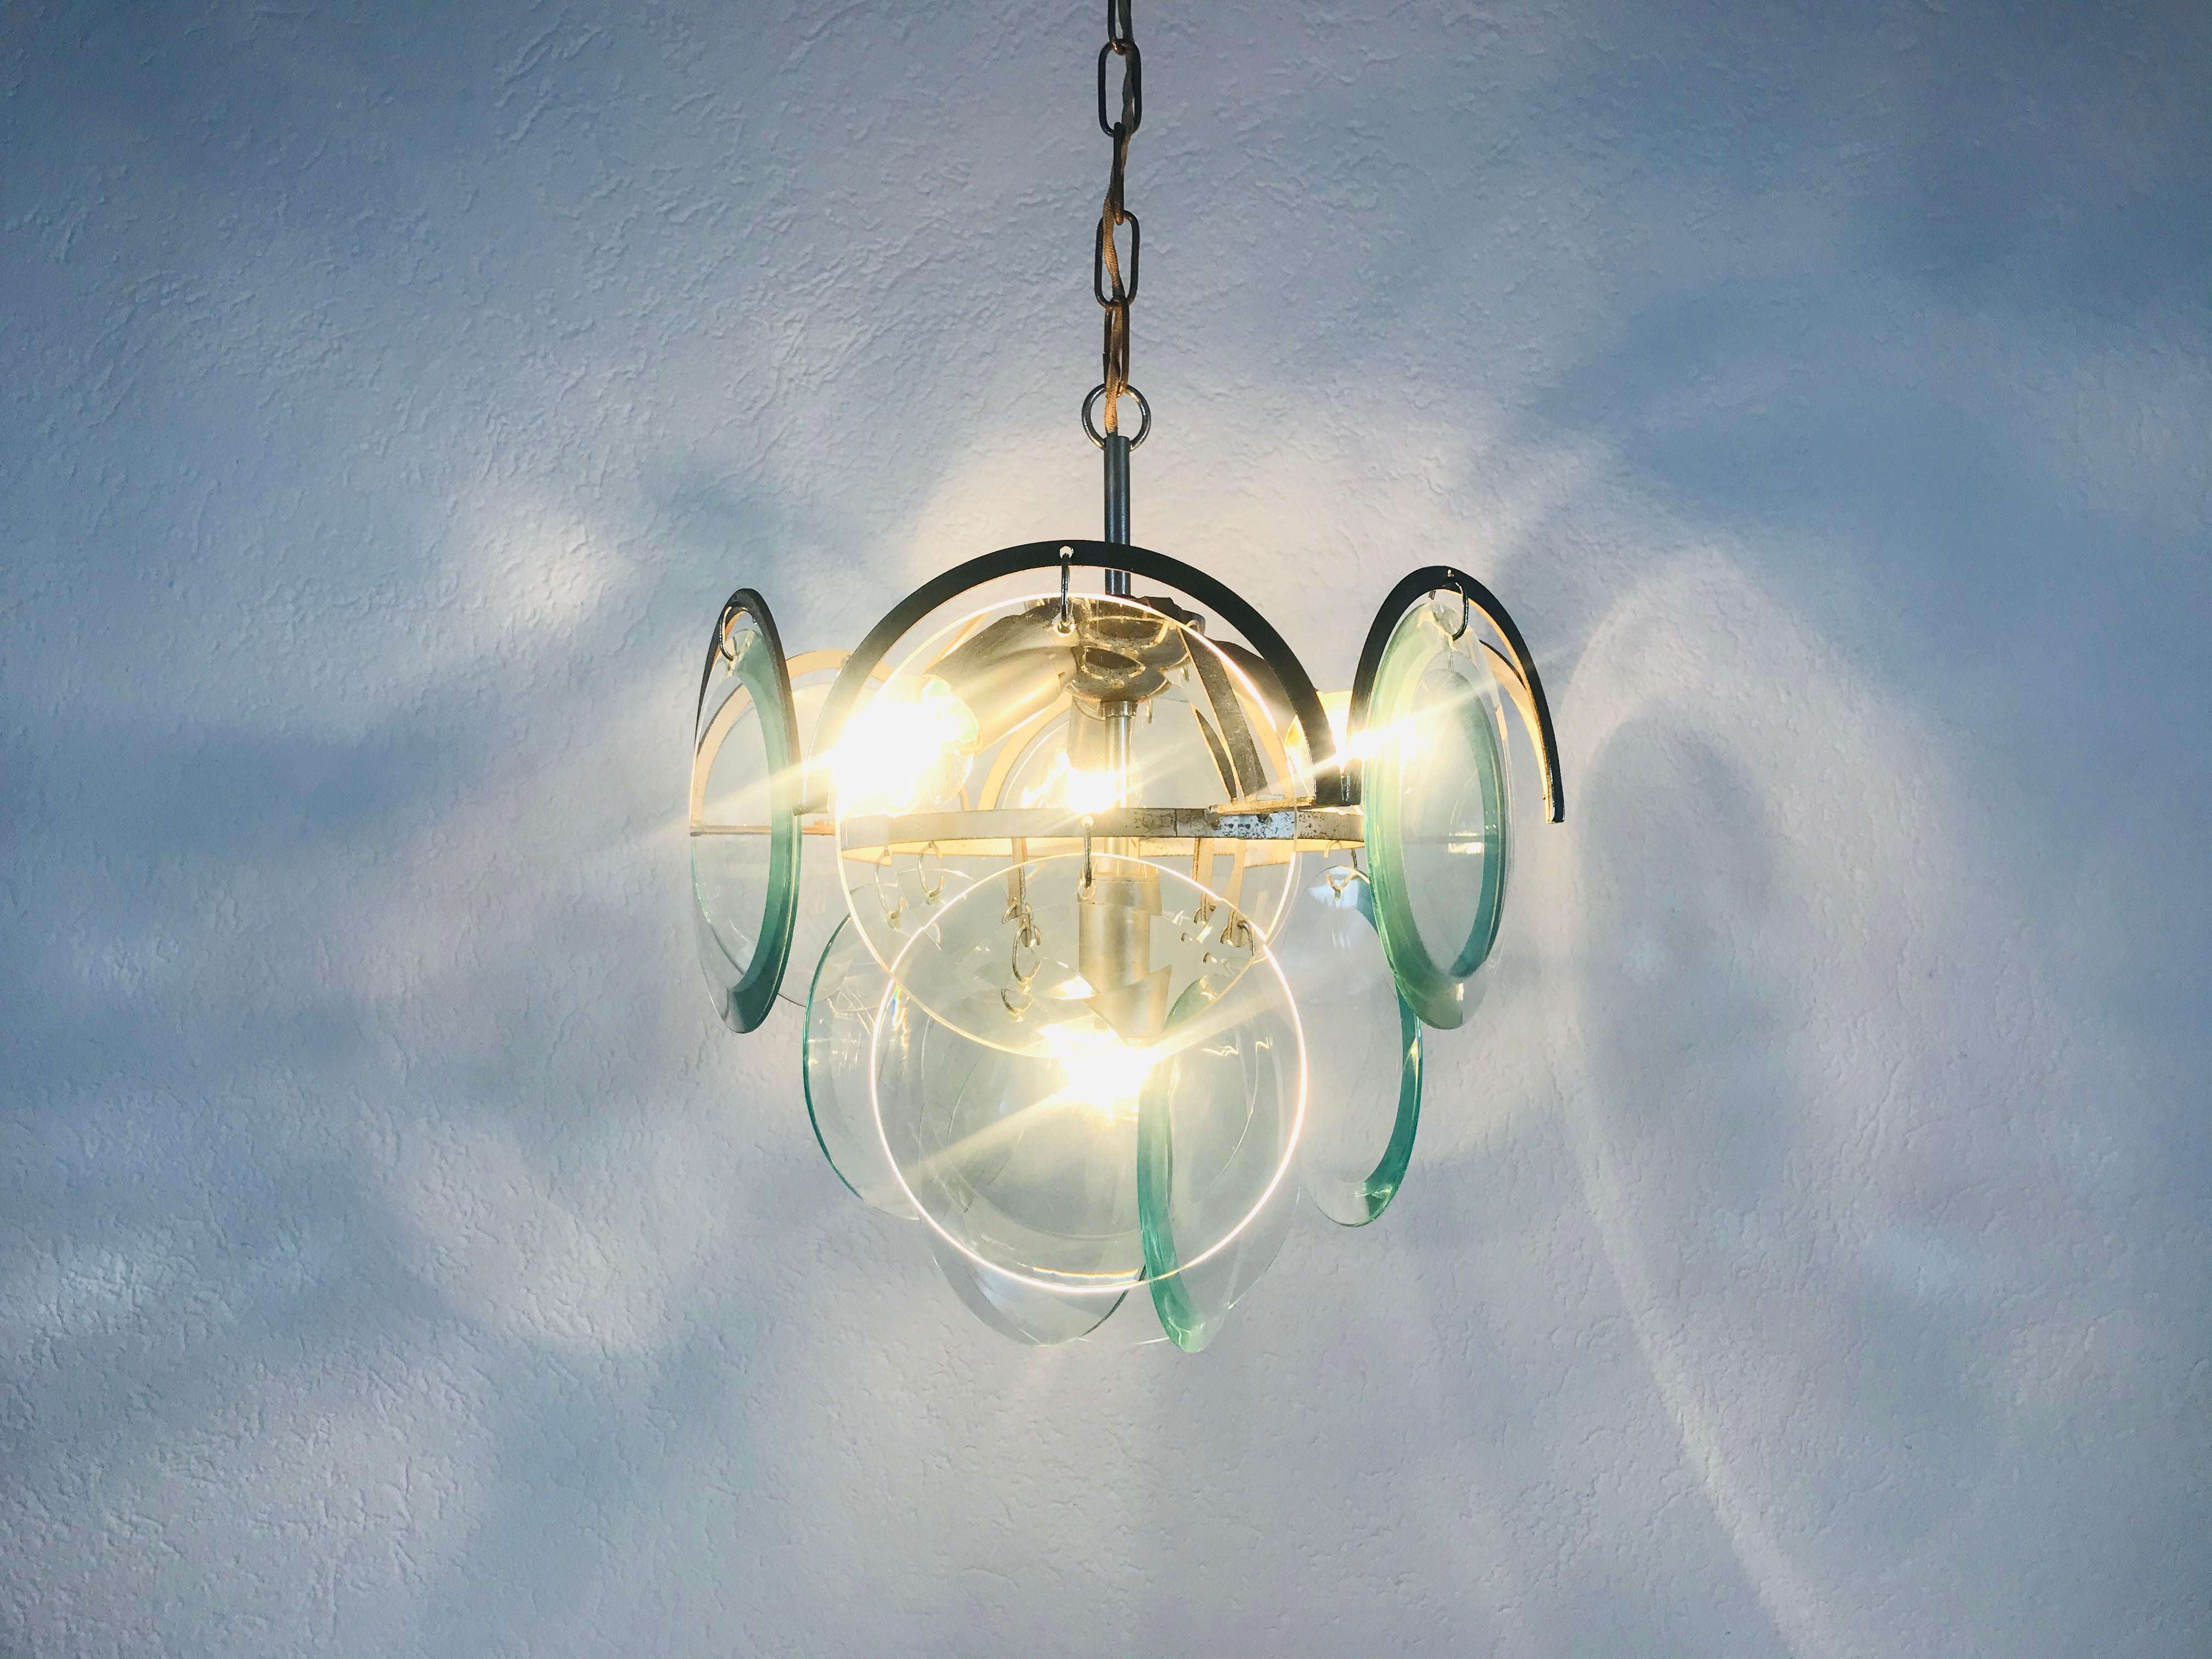 A midcentury chandelier made in Italy in the 1960s. It is fascinating with its colorful glasses and chrome body.

The light requires E14 light bulbs.